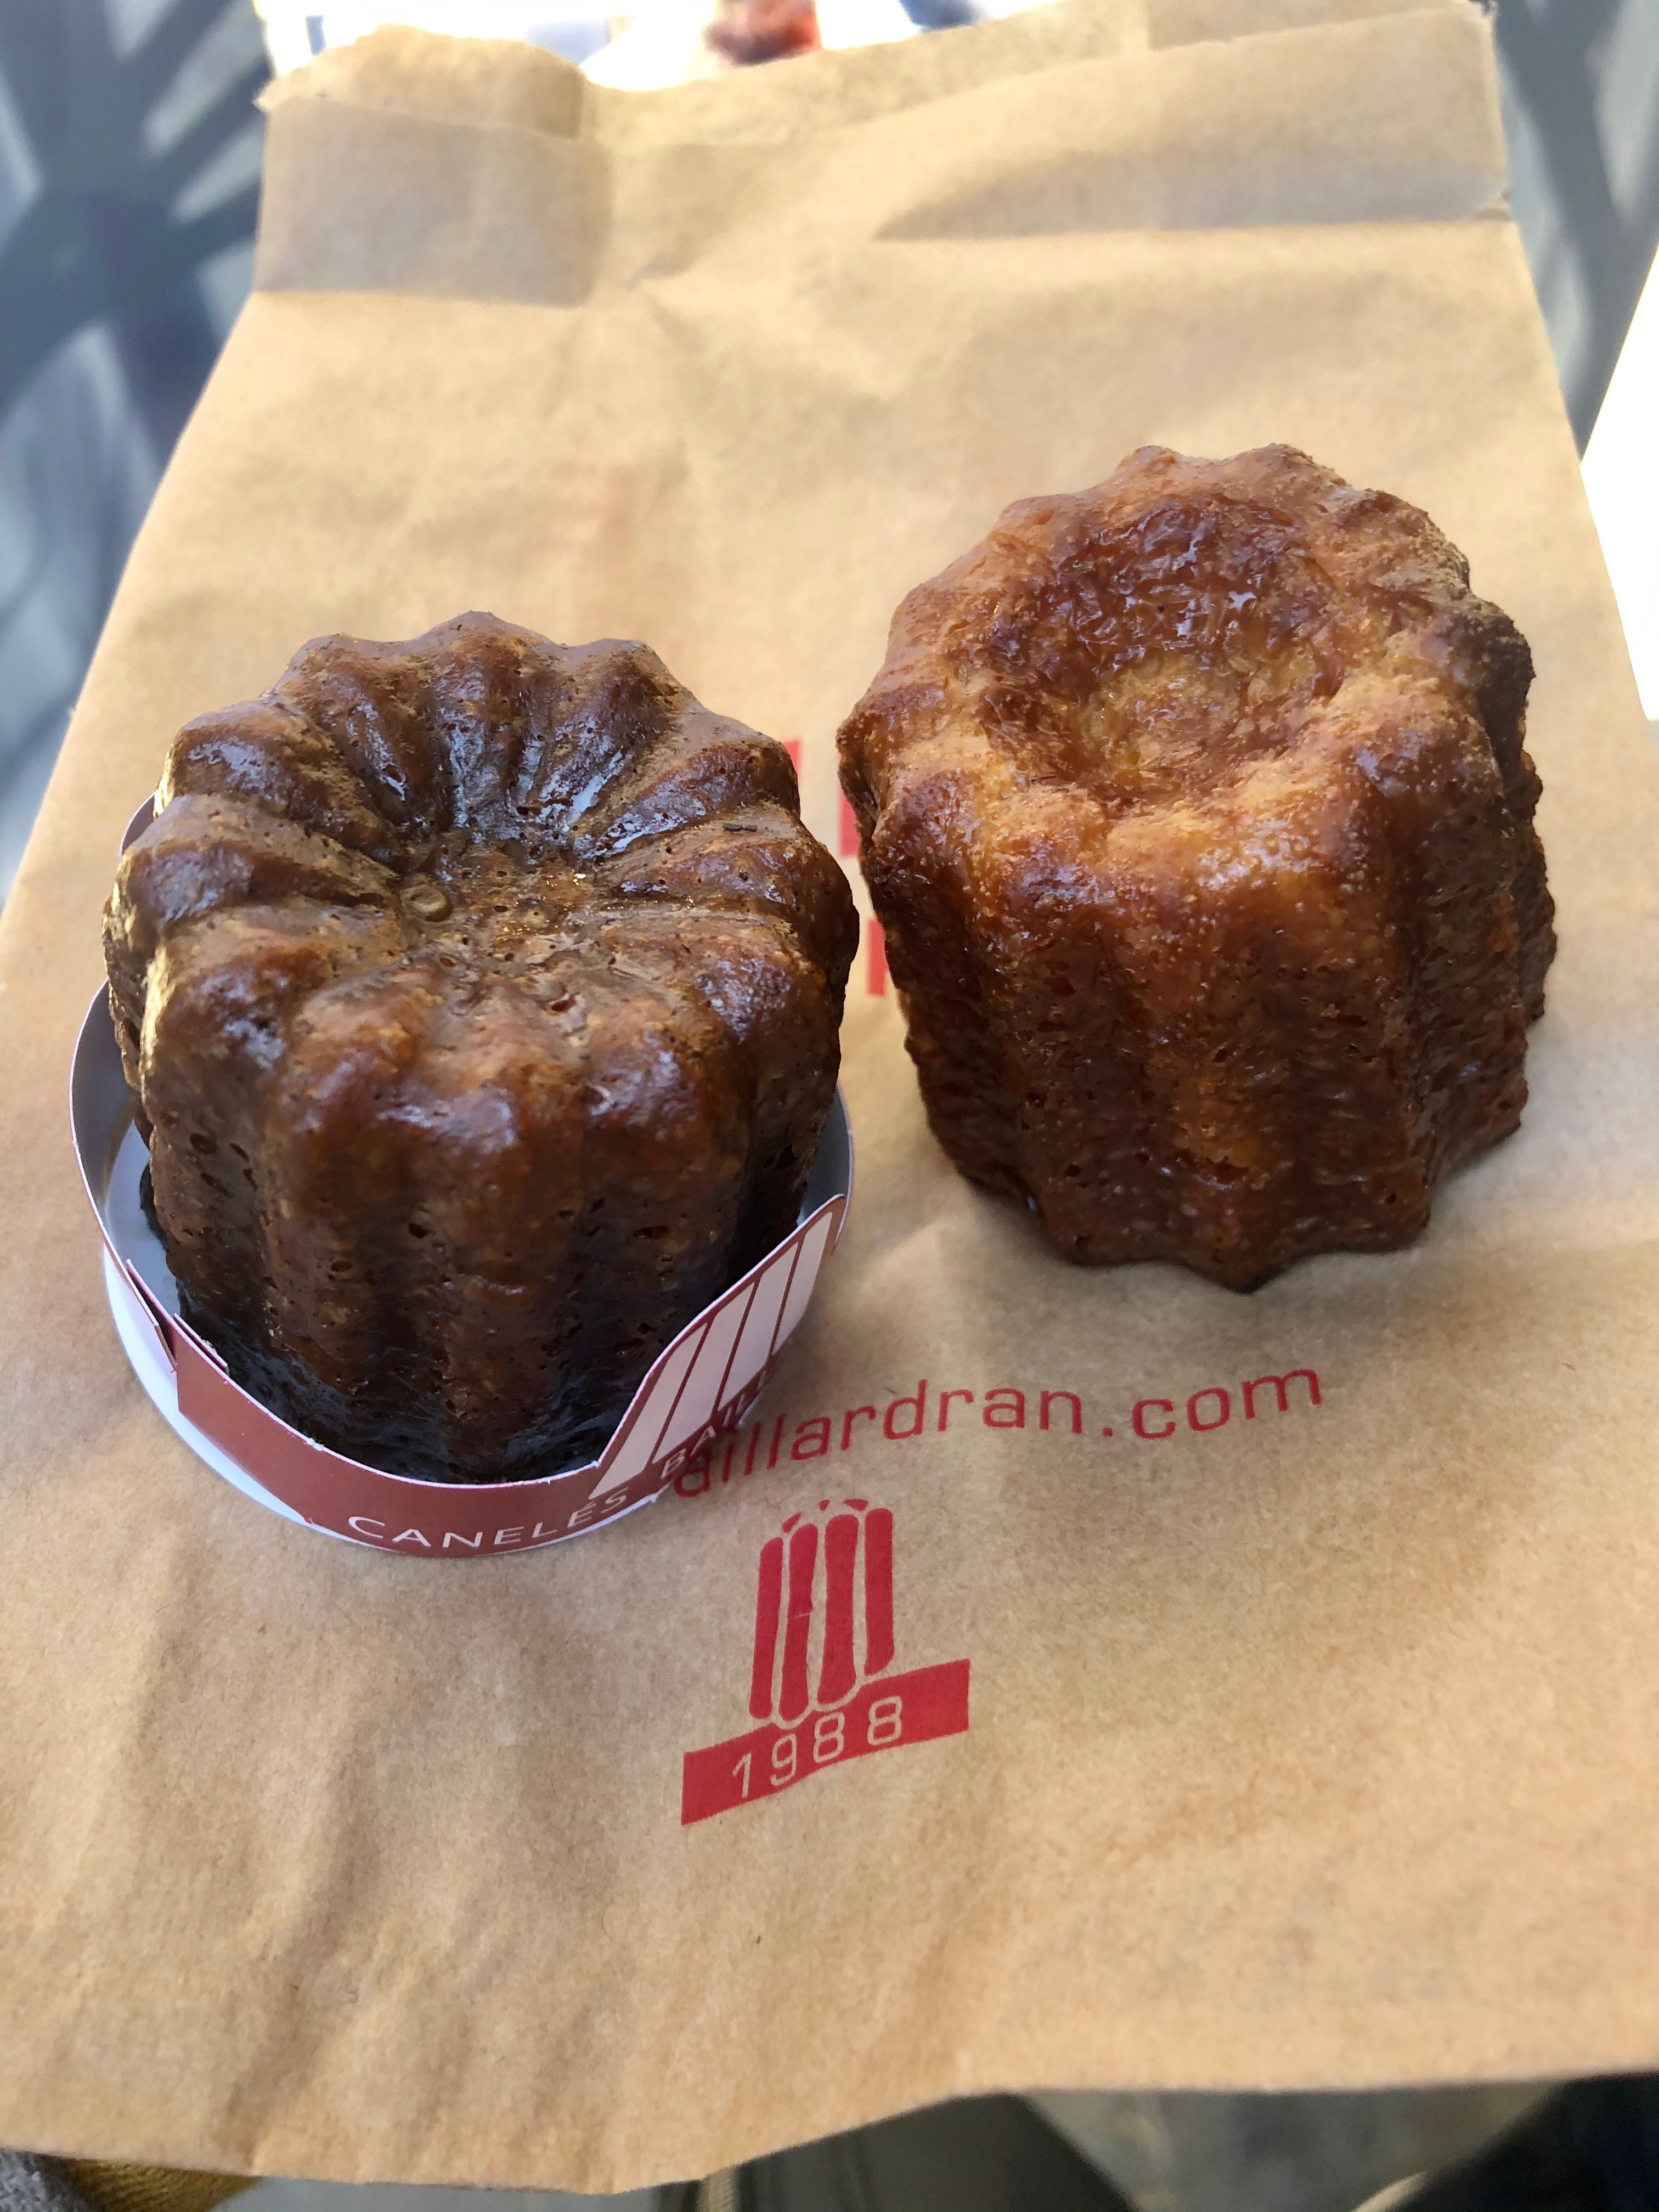 The two great canelé rivals side by side - up to you to choose!